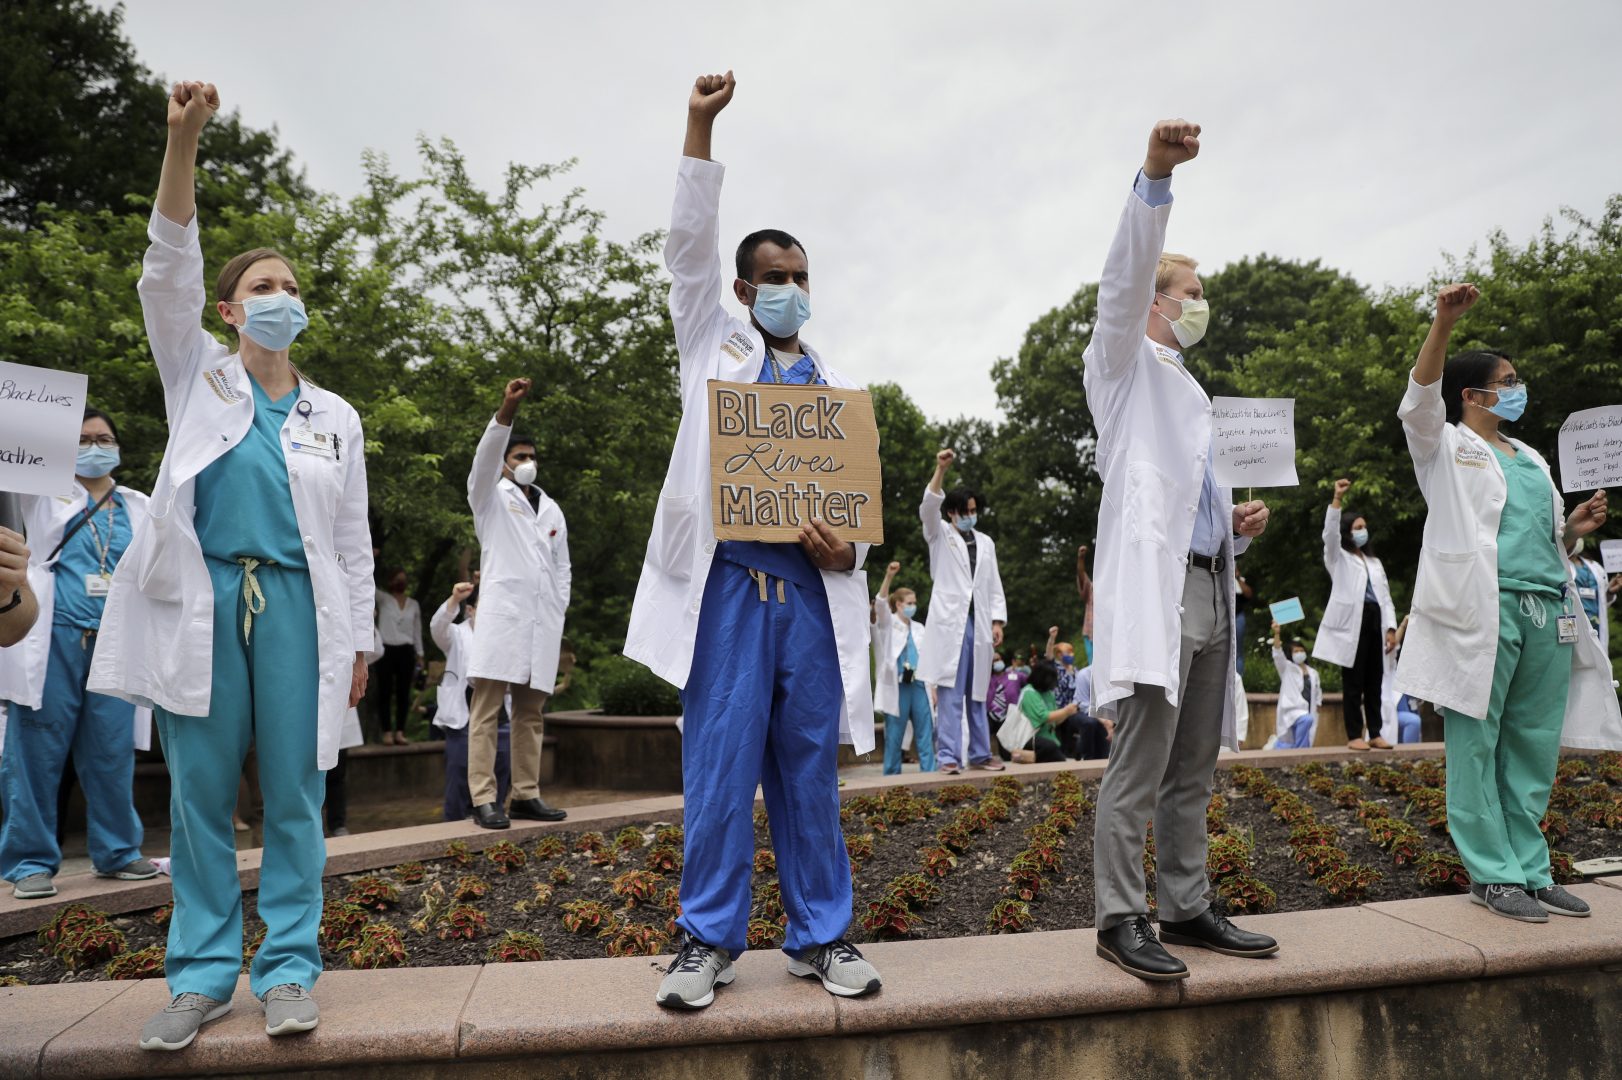 Healthcare professionals gather outside Barnes-Jewish Hospital to demonstrate in support of the Black Lives Matter movement Friday, June 5, 2020, in St. Louis, Mo. The White Coats for Black Lives protest was organized to stand in solidarity with those speaking out against the death of George Floyd who died after being restrained by Minneapolis police officers on May 25.